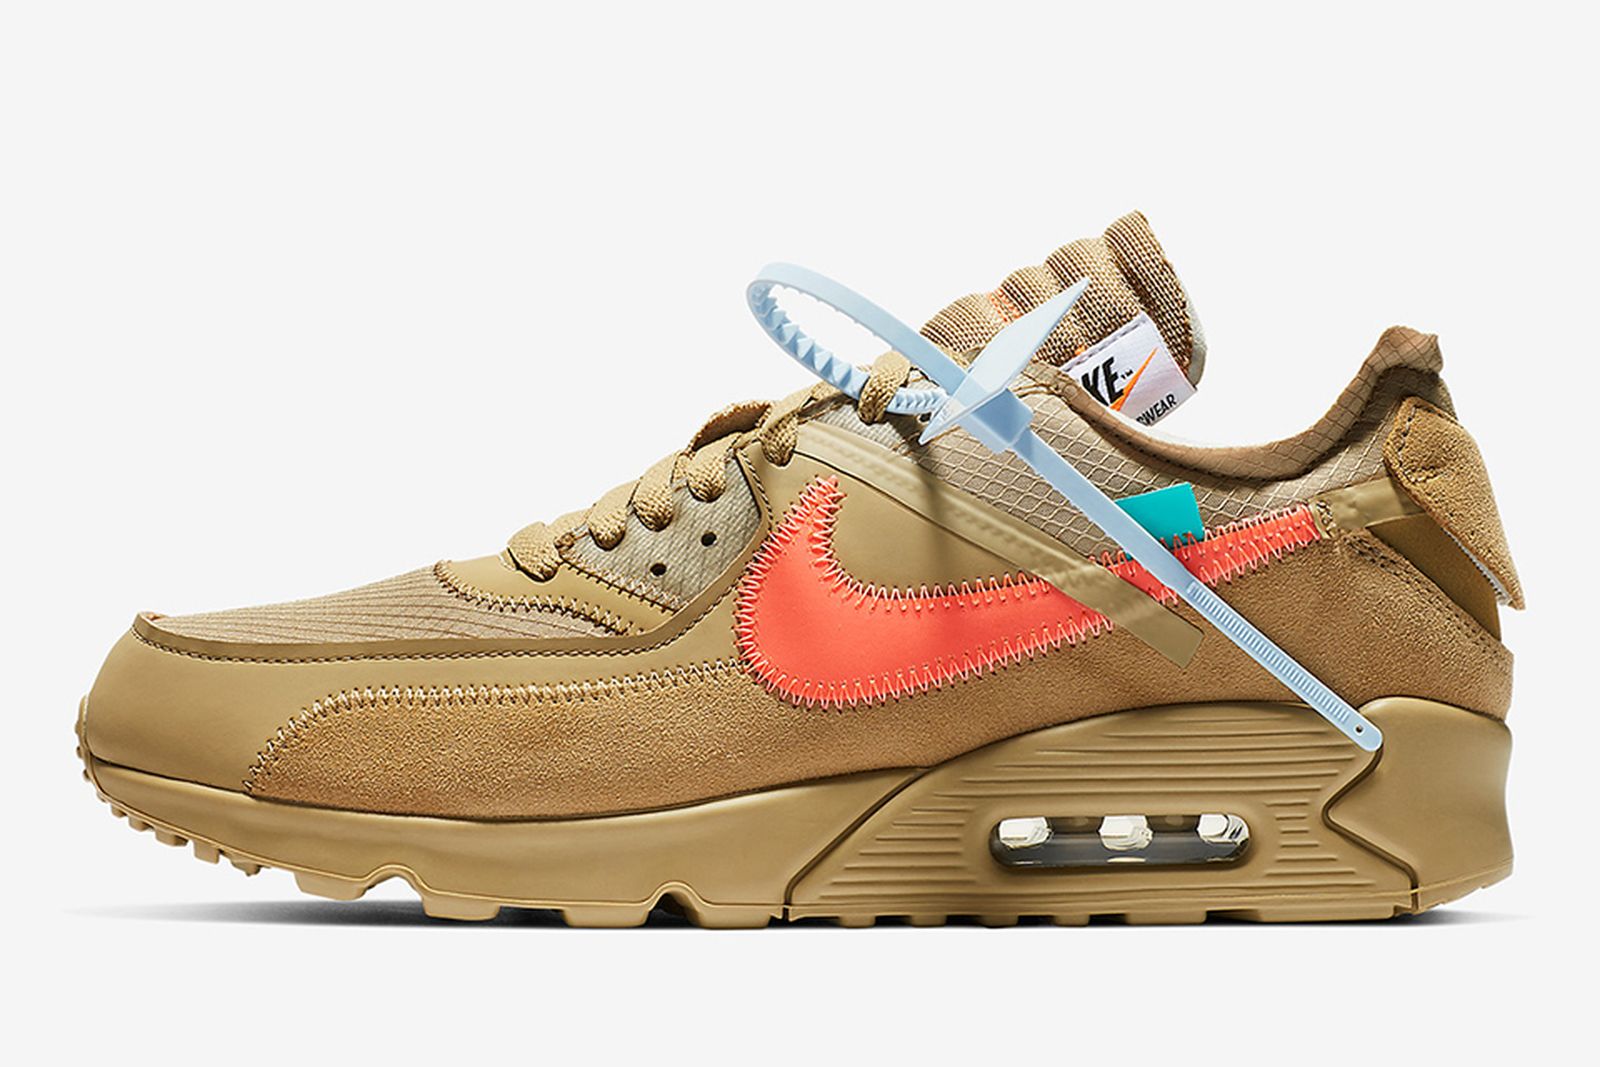 financial Which one poverty OFF-WHITE x Nike Air Max 90 "Desert Ore": Release Date, Price & More Info